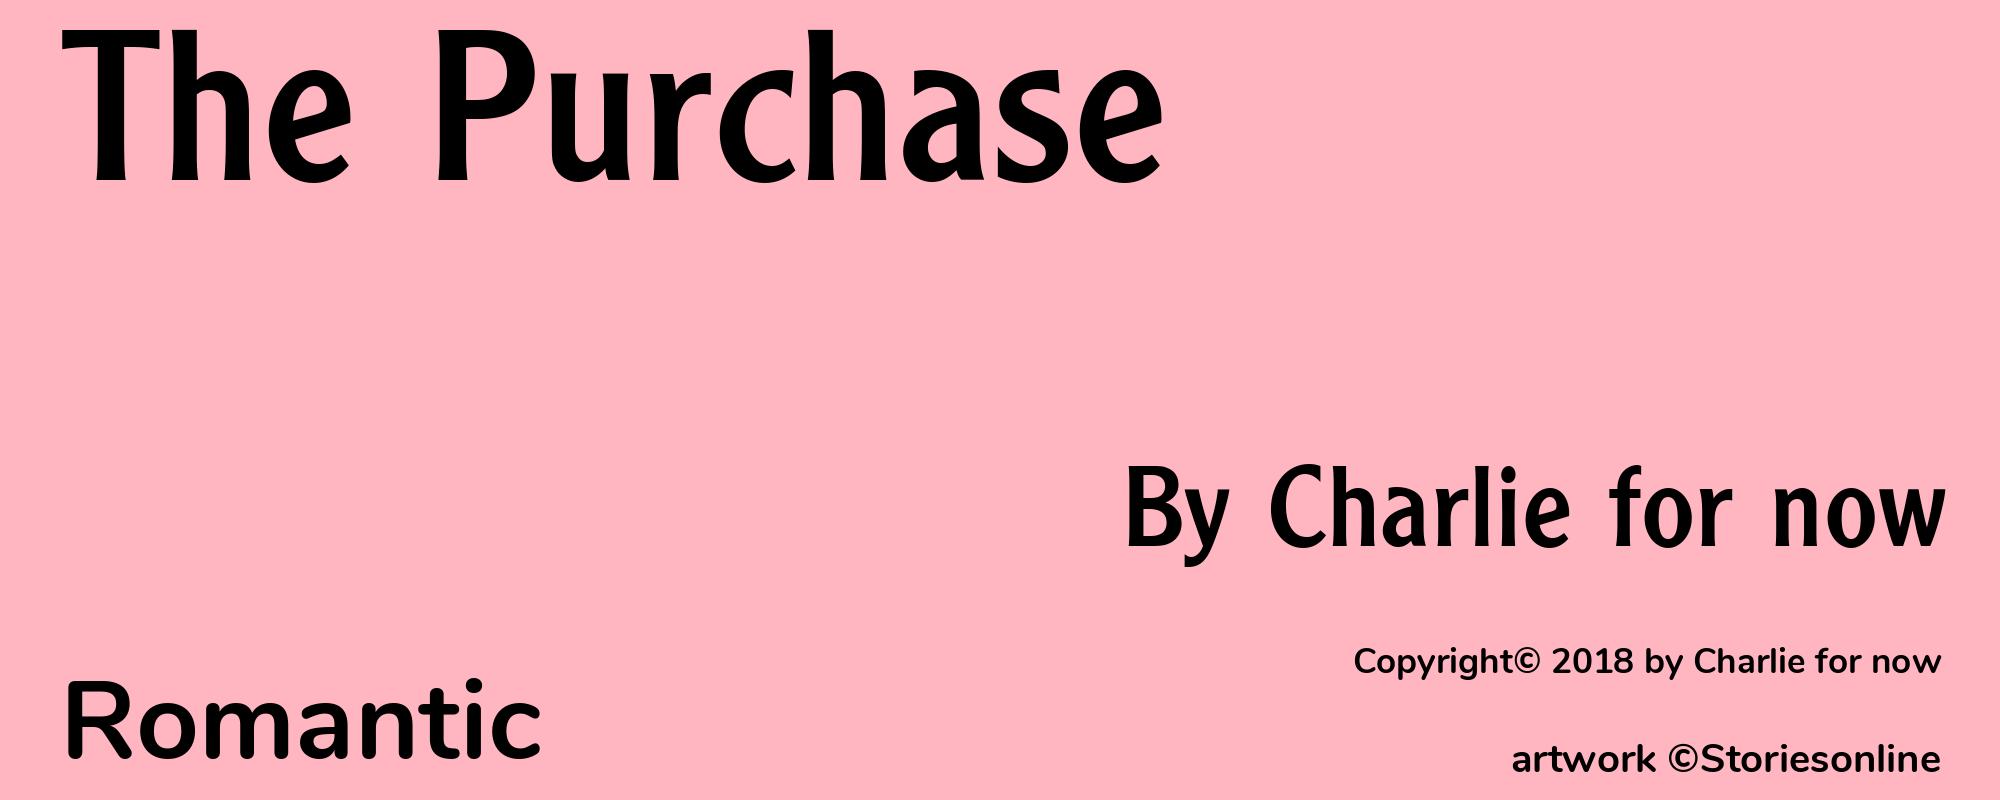 The Purchase - Cover